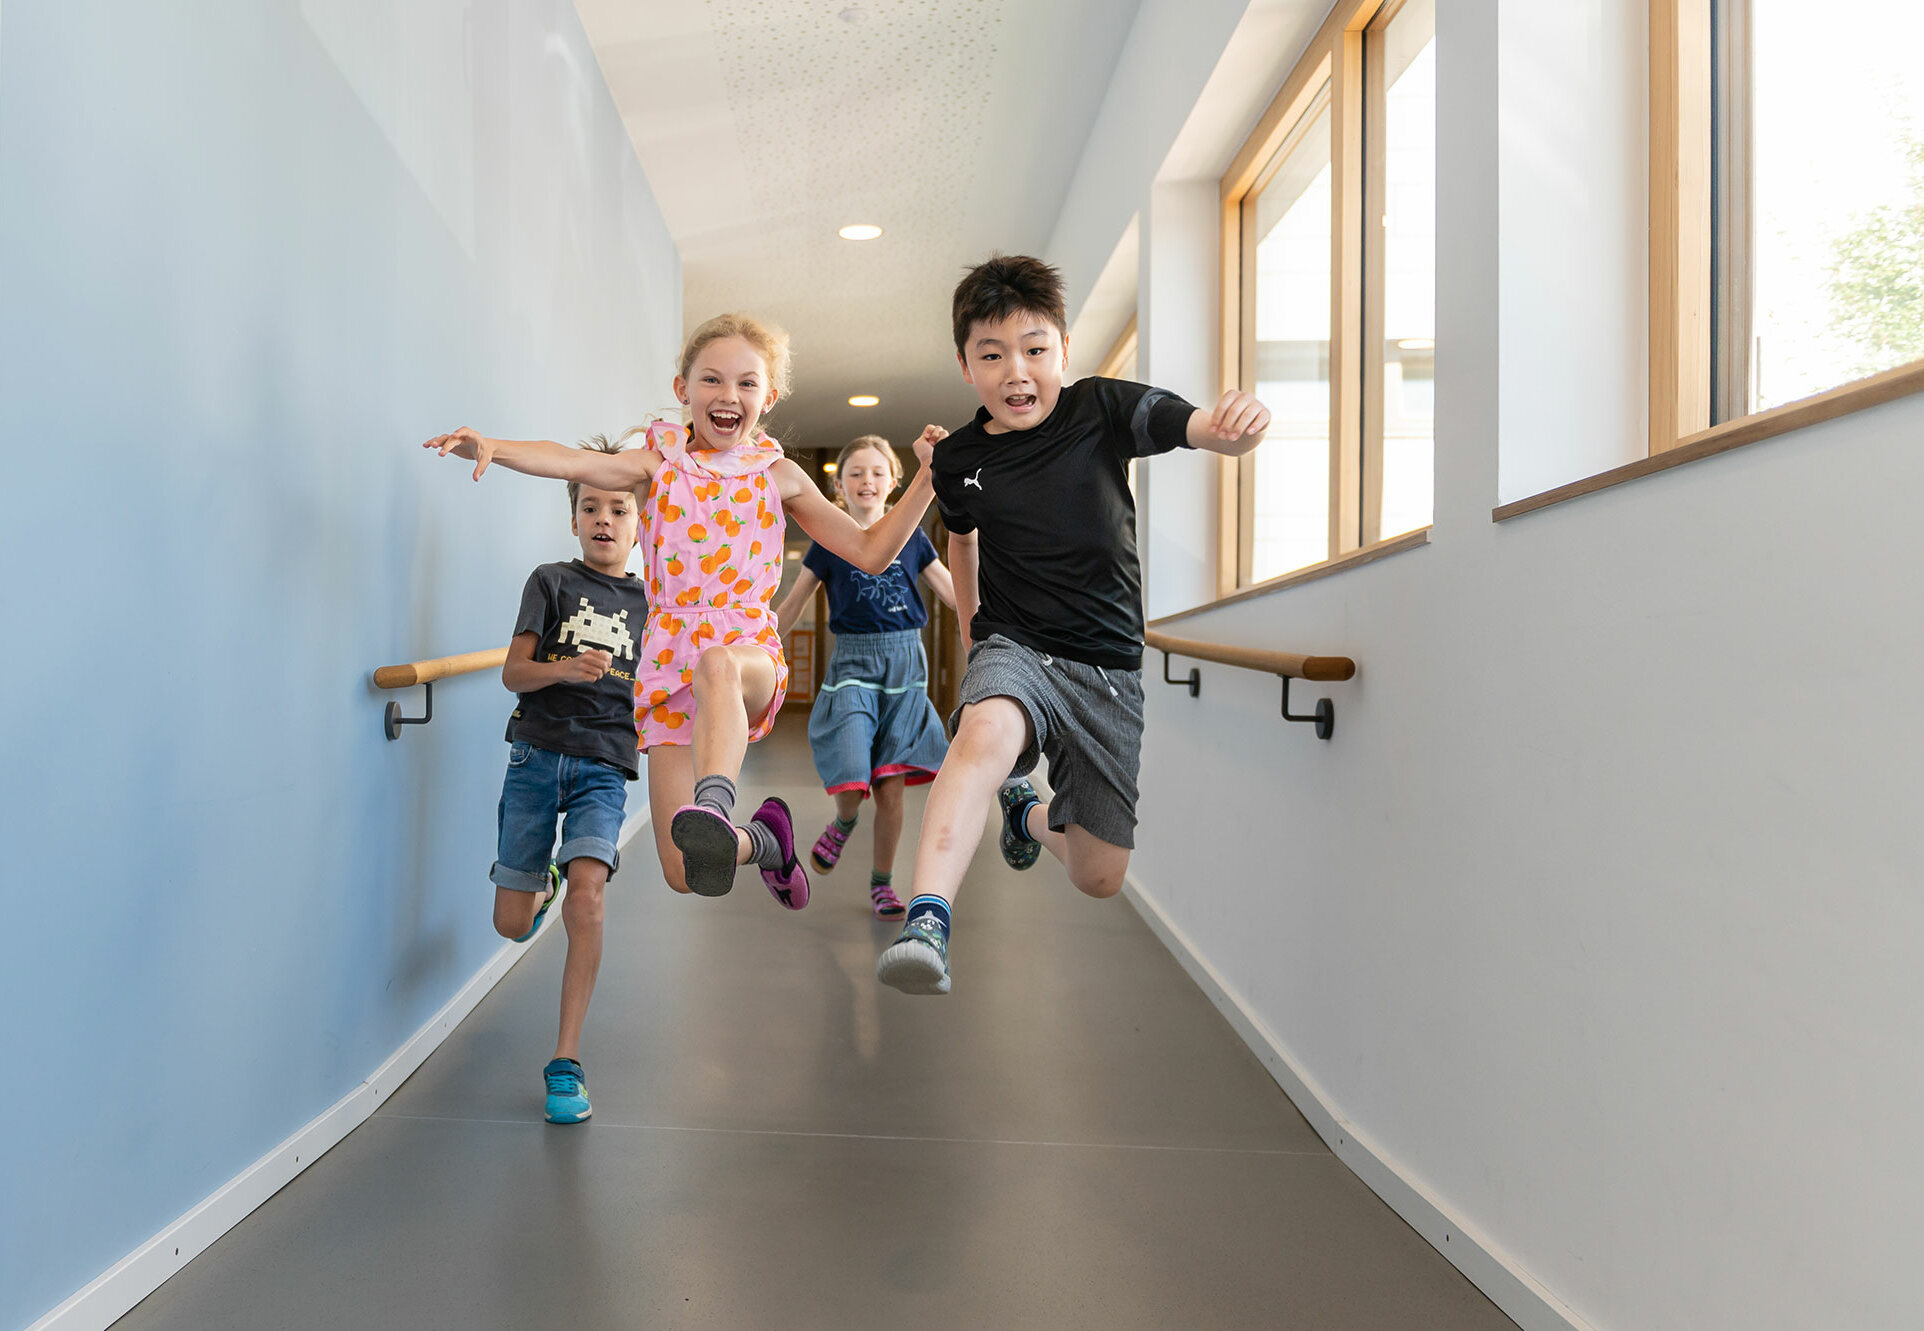 Four students can be seen running through a school corridor. The two in front make a step jump towards the camera.